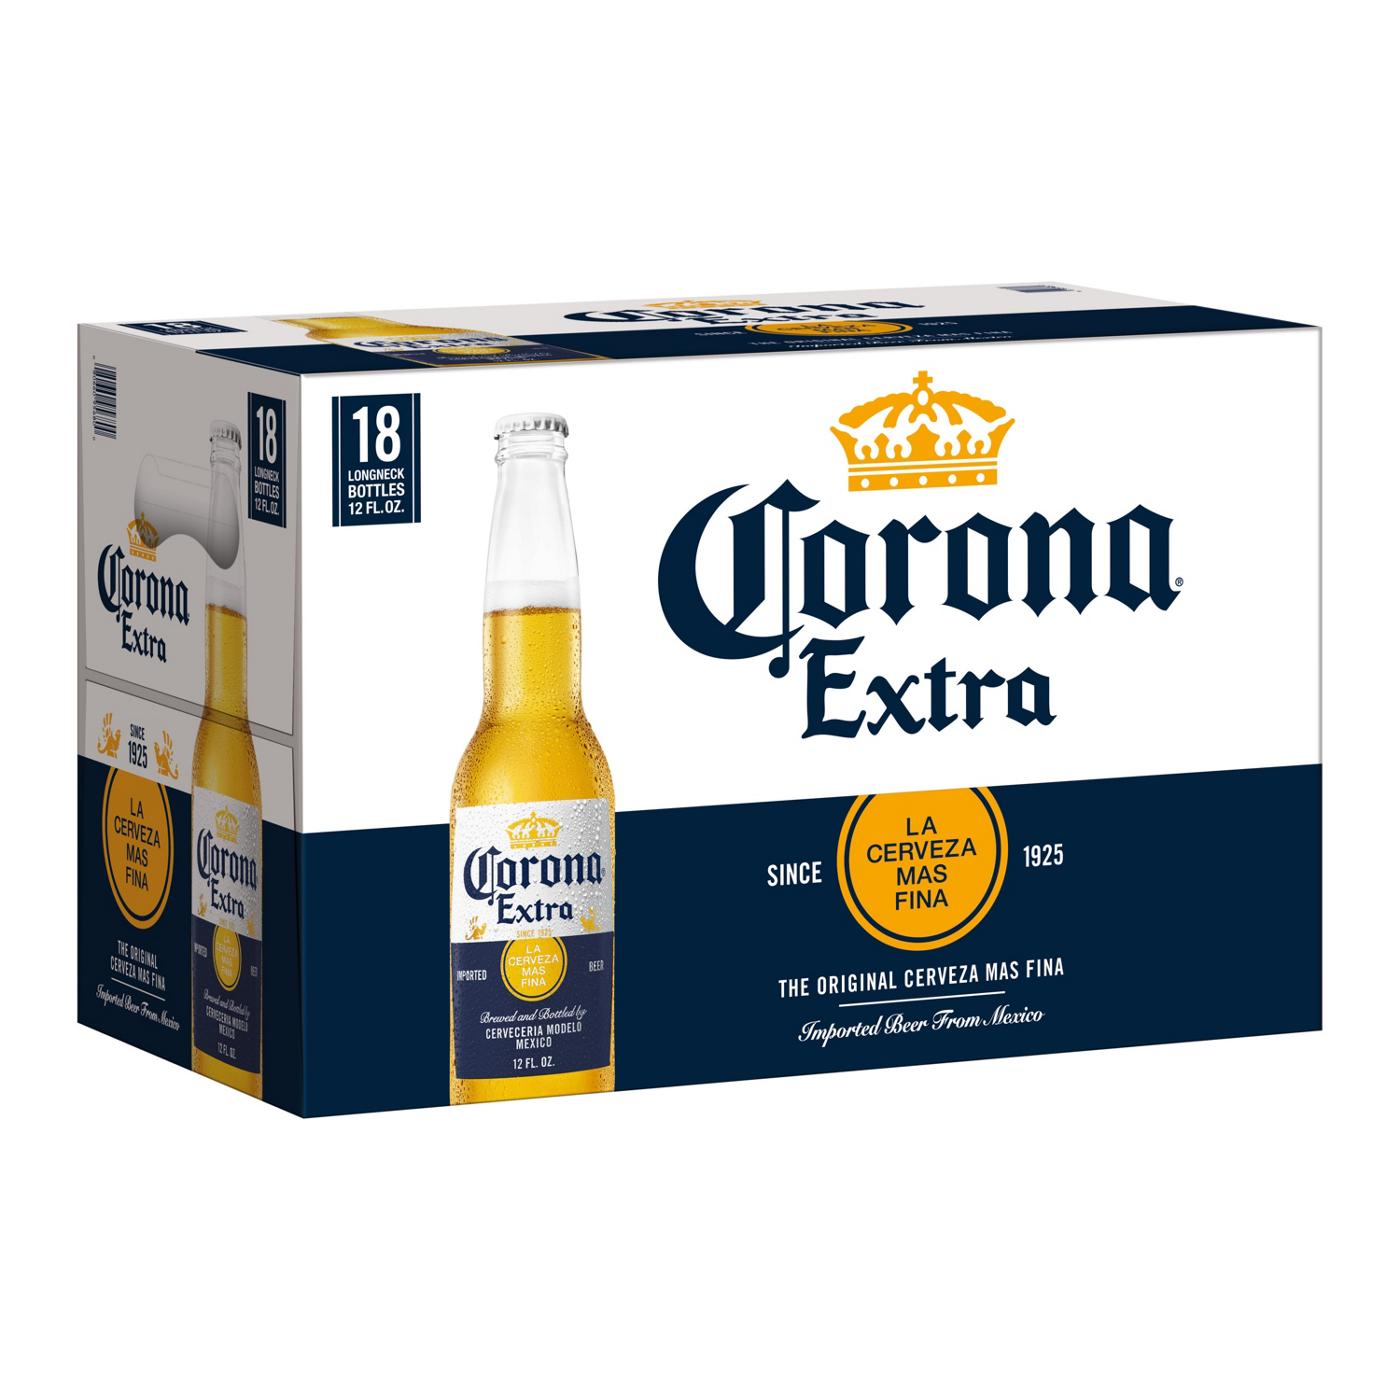 Corona Extra Mexican Lager Import Beer 12 oz Bottles, 18 pk; image 1 of 10